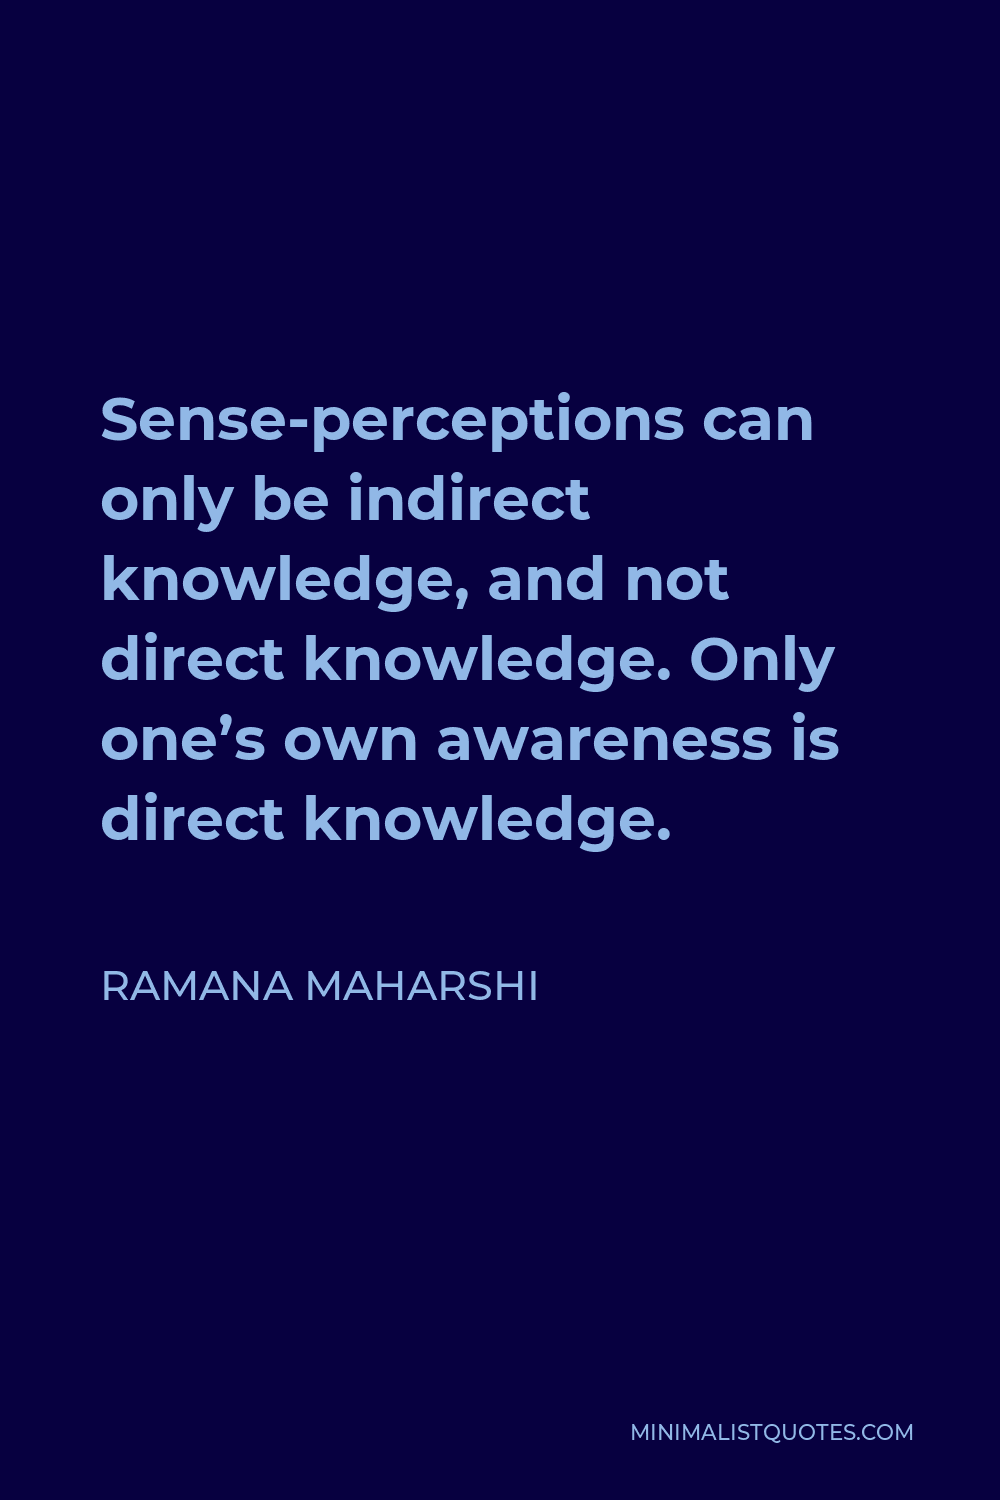 Ramana Maharshi Quote - Sense-perceptions can only be indirect knowledge, and not direct knowledge. Only one’s own awareness is direct knowledge.